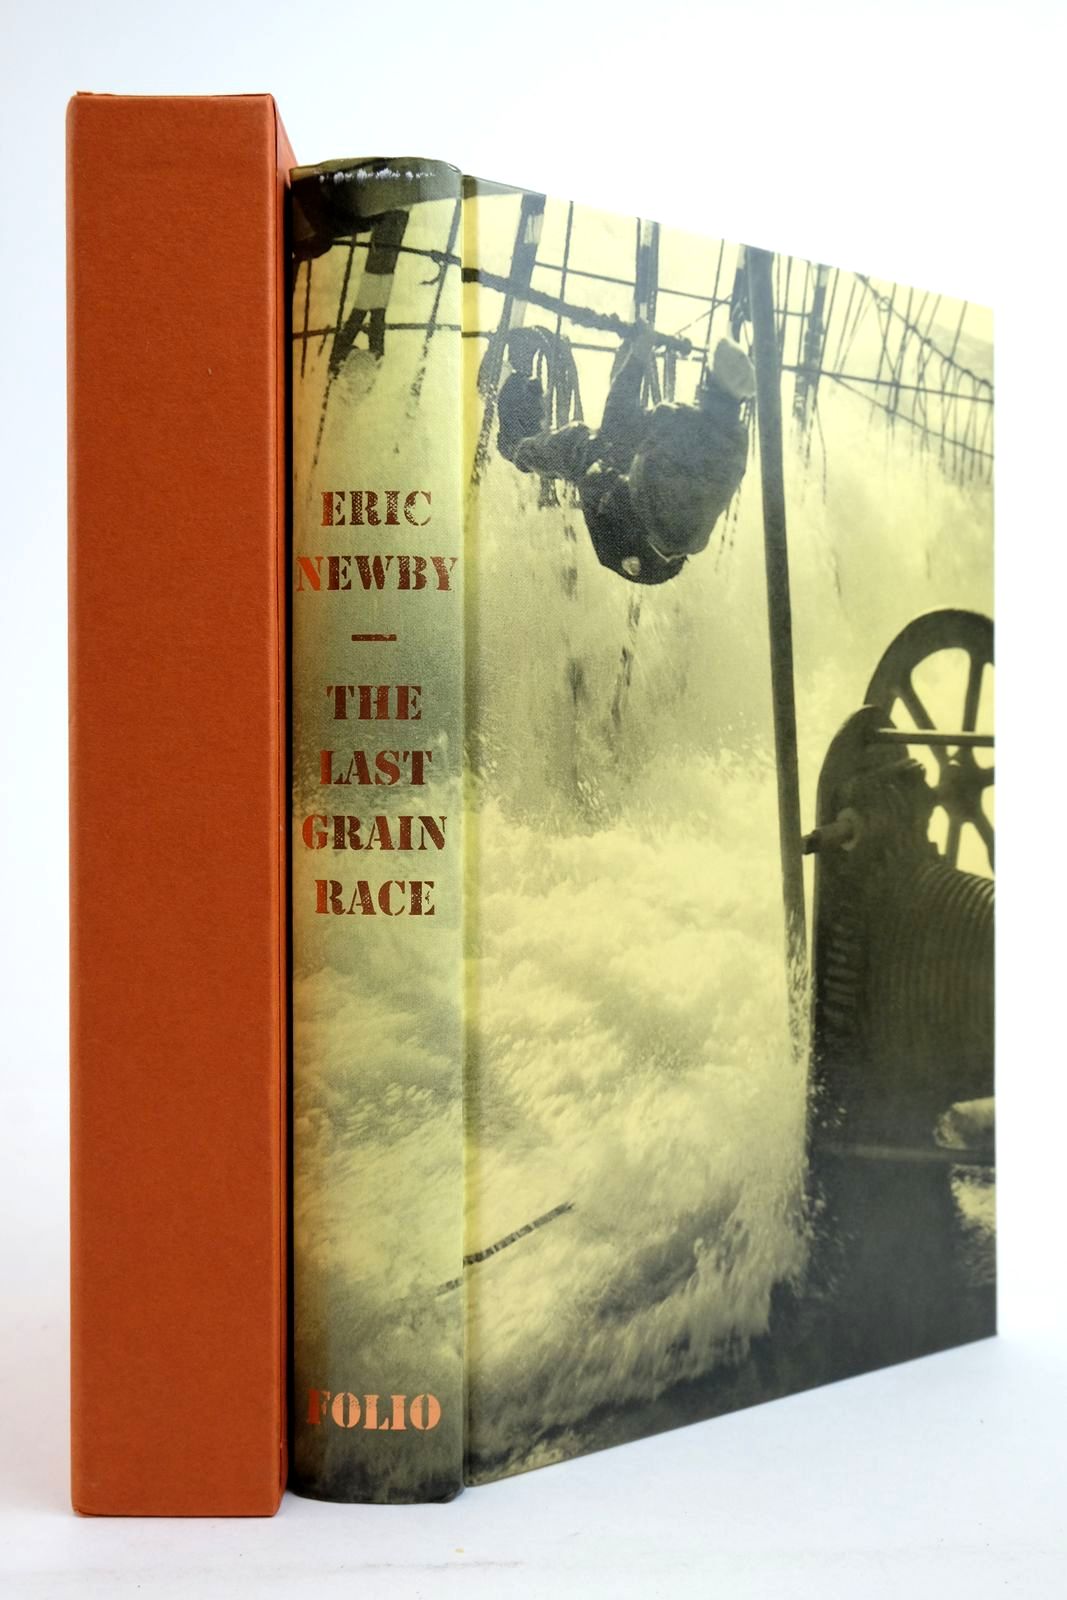 Photo of THE LAST GRAIN RACE written by Newby, Eric published by Folio Society (STOCK CODE: 2135634)  for sale by Stella & Rose's Books